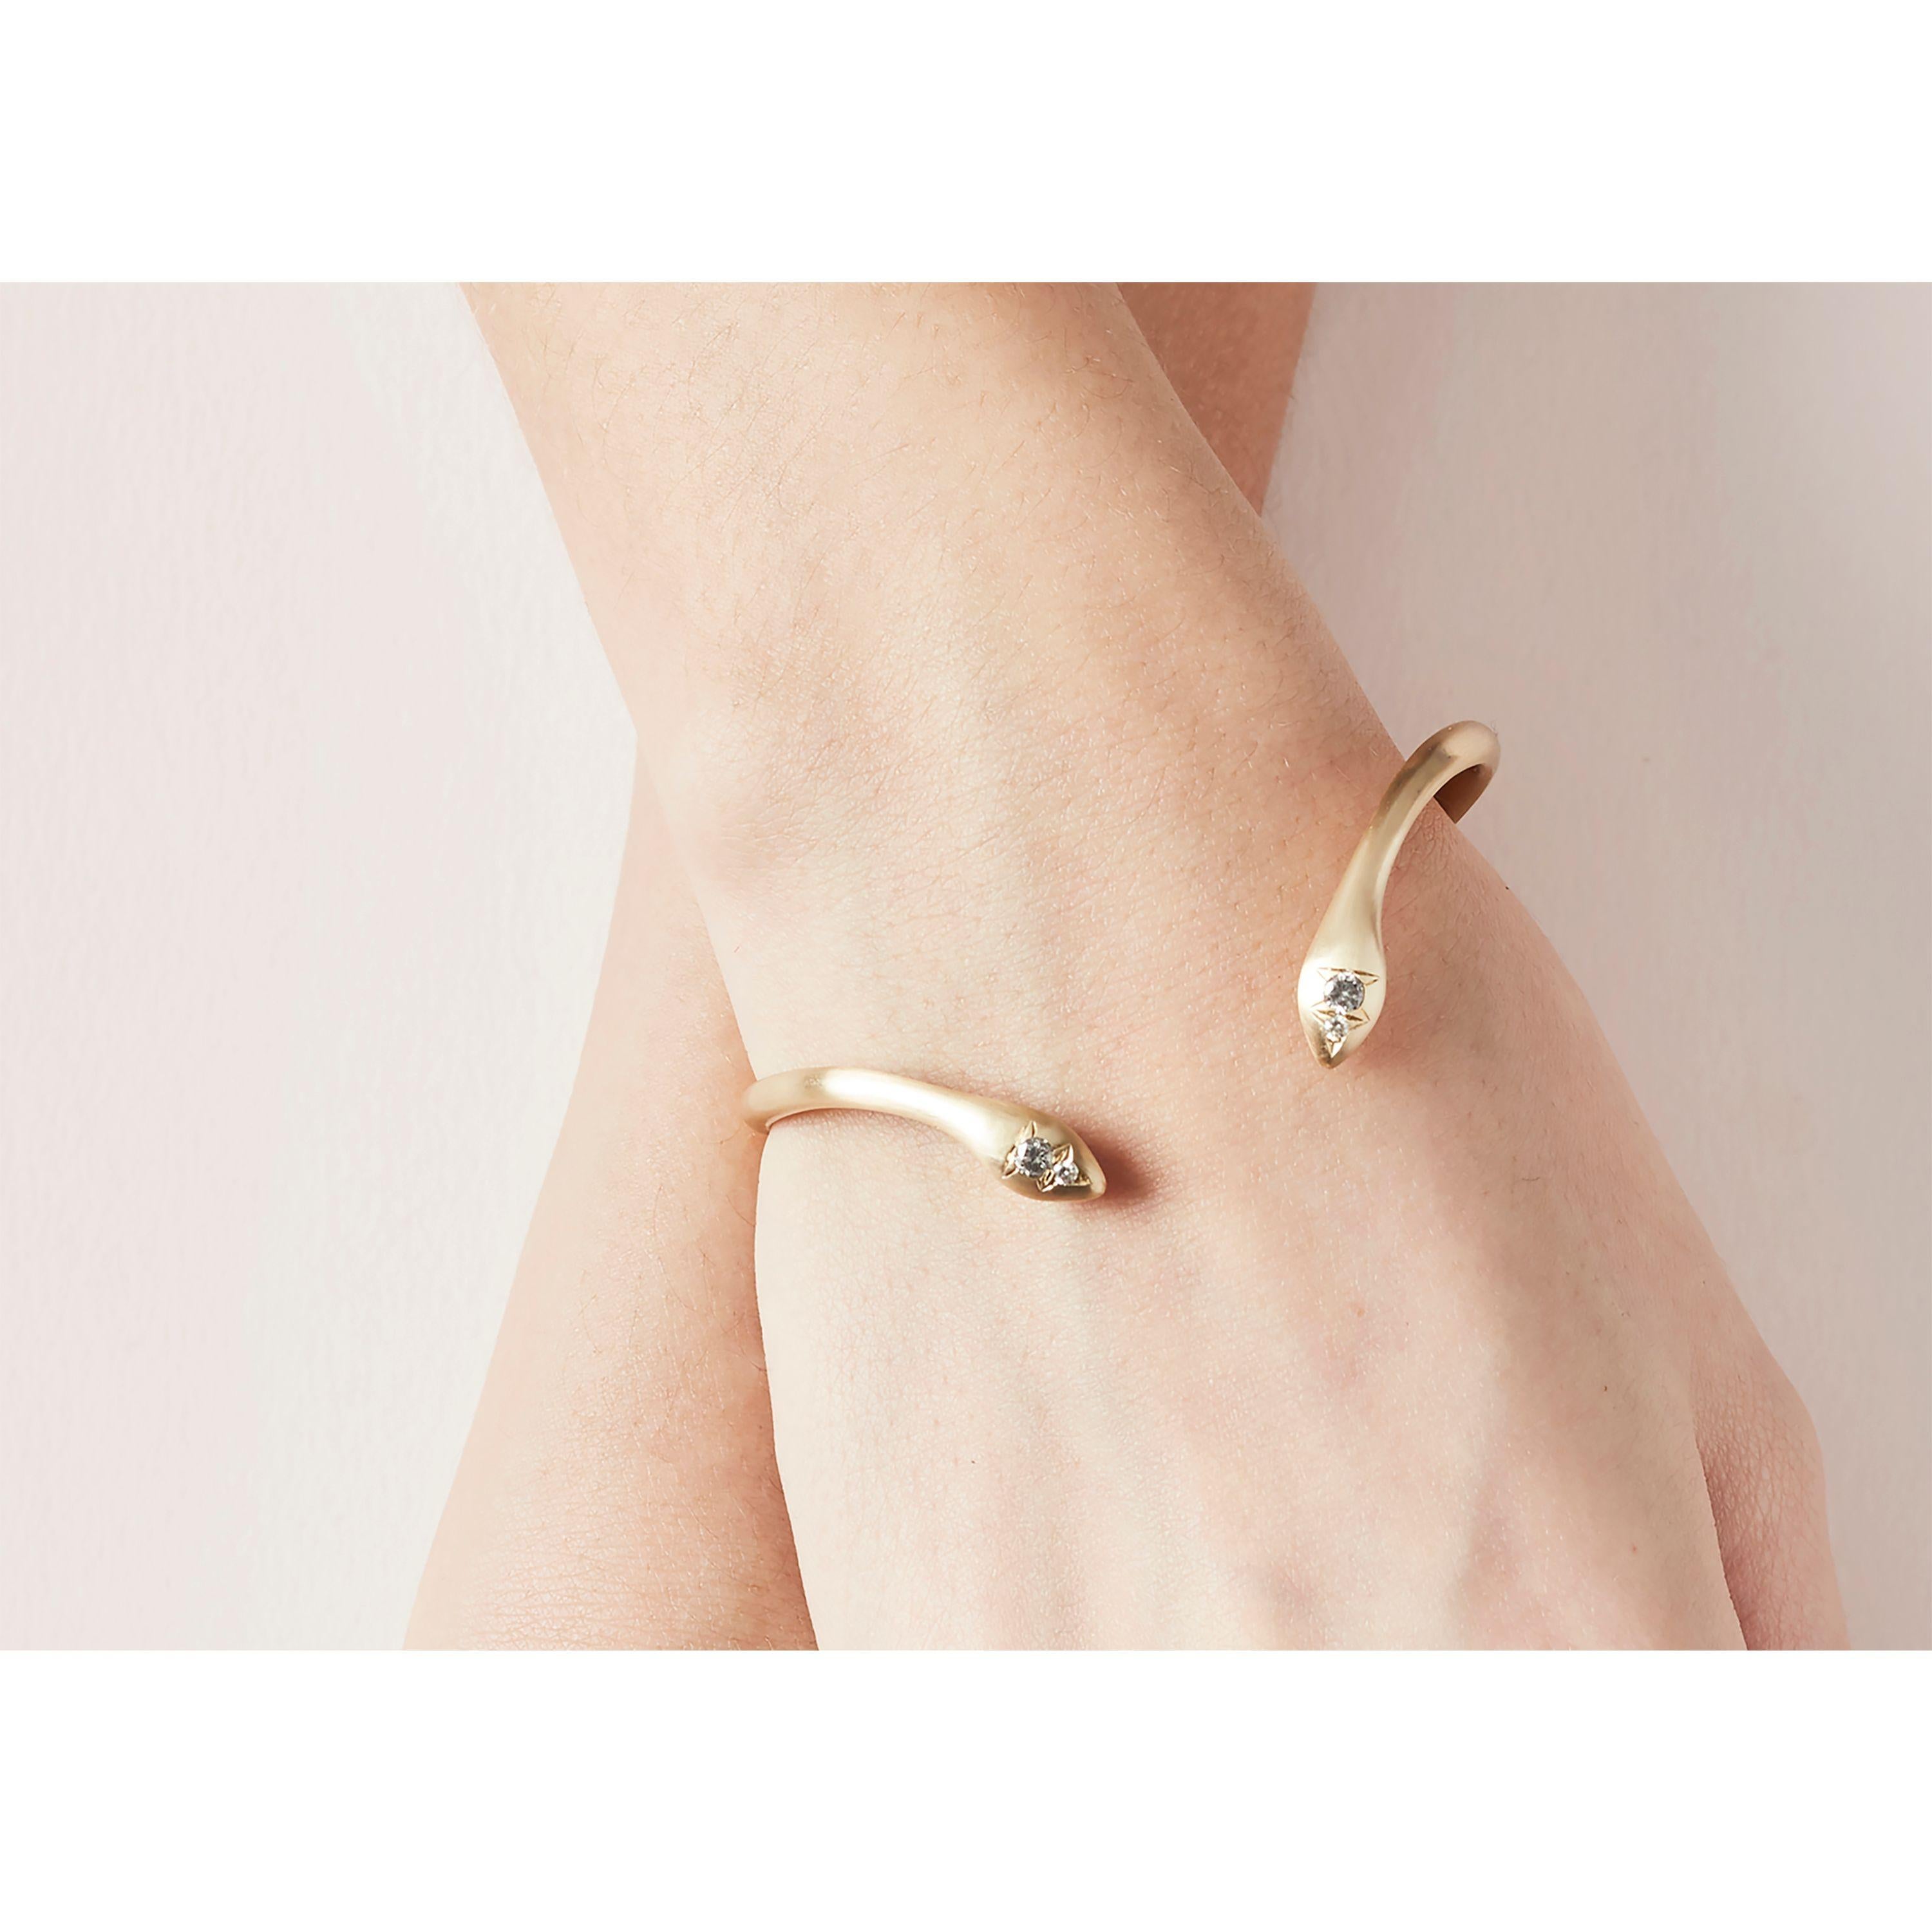 Aziza 10k Grey Diamond Bracelet by dan-yell

10k Aziza Grey Diamond Bracelet is a take on ancient snake cuff. Aziza's meaning is both precious and powerful. And reflects its palindrome design, reading the same backward as forward.

Delicate, fine